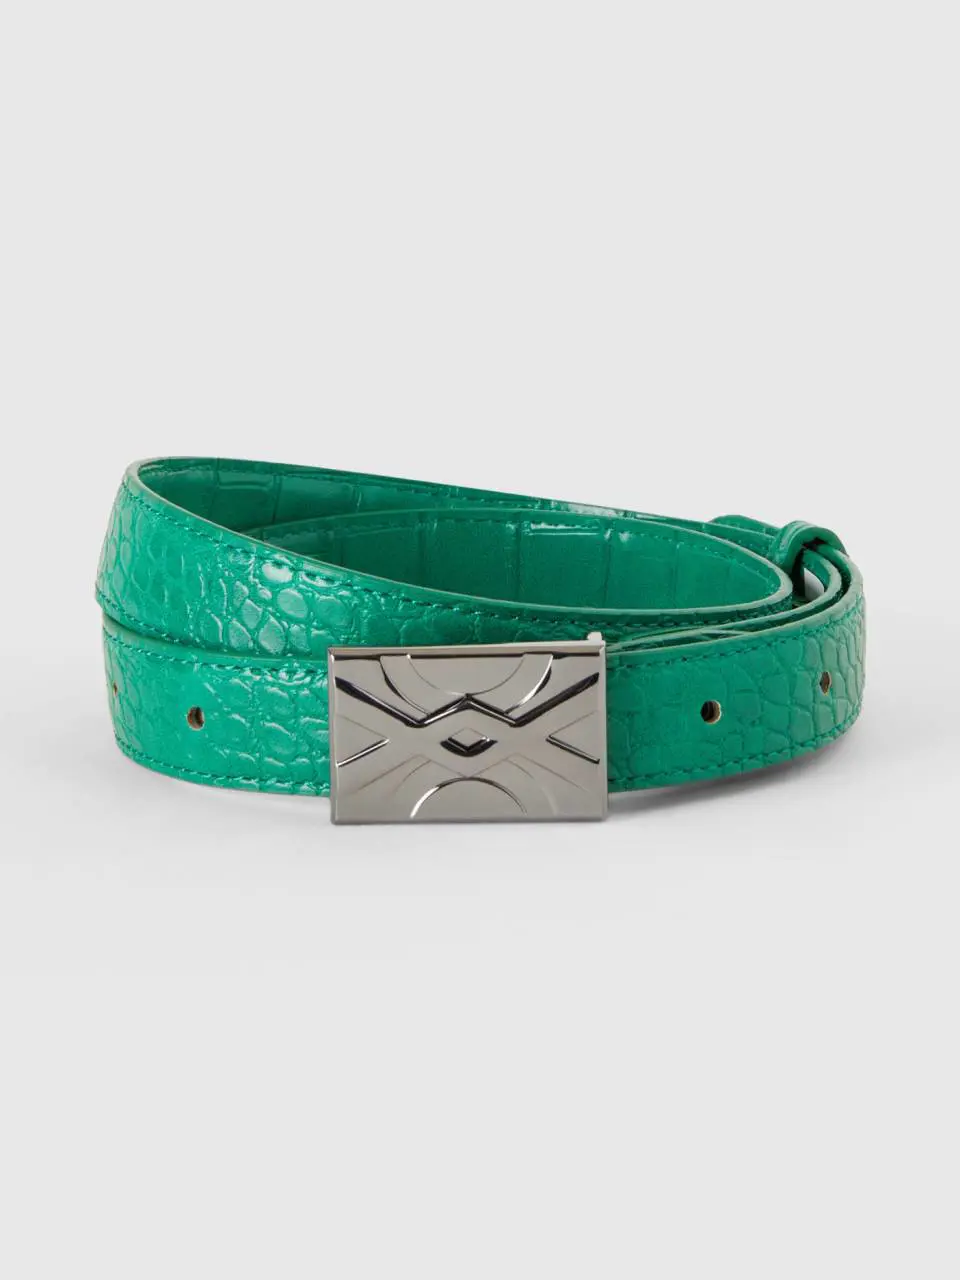 Benetton thin green belt with coconut print. 1